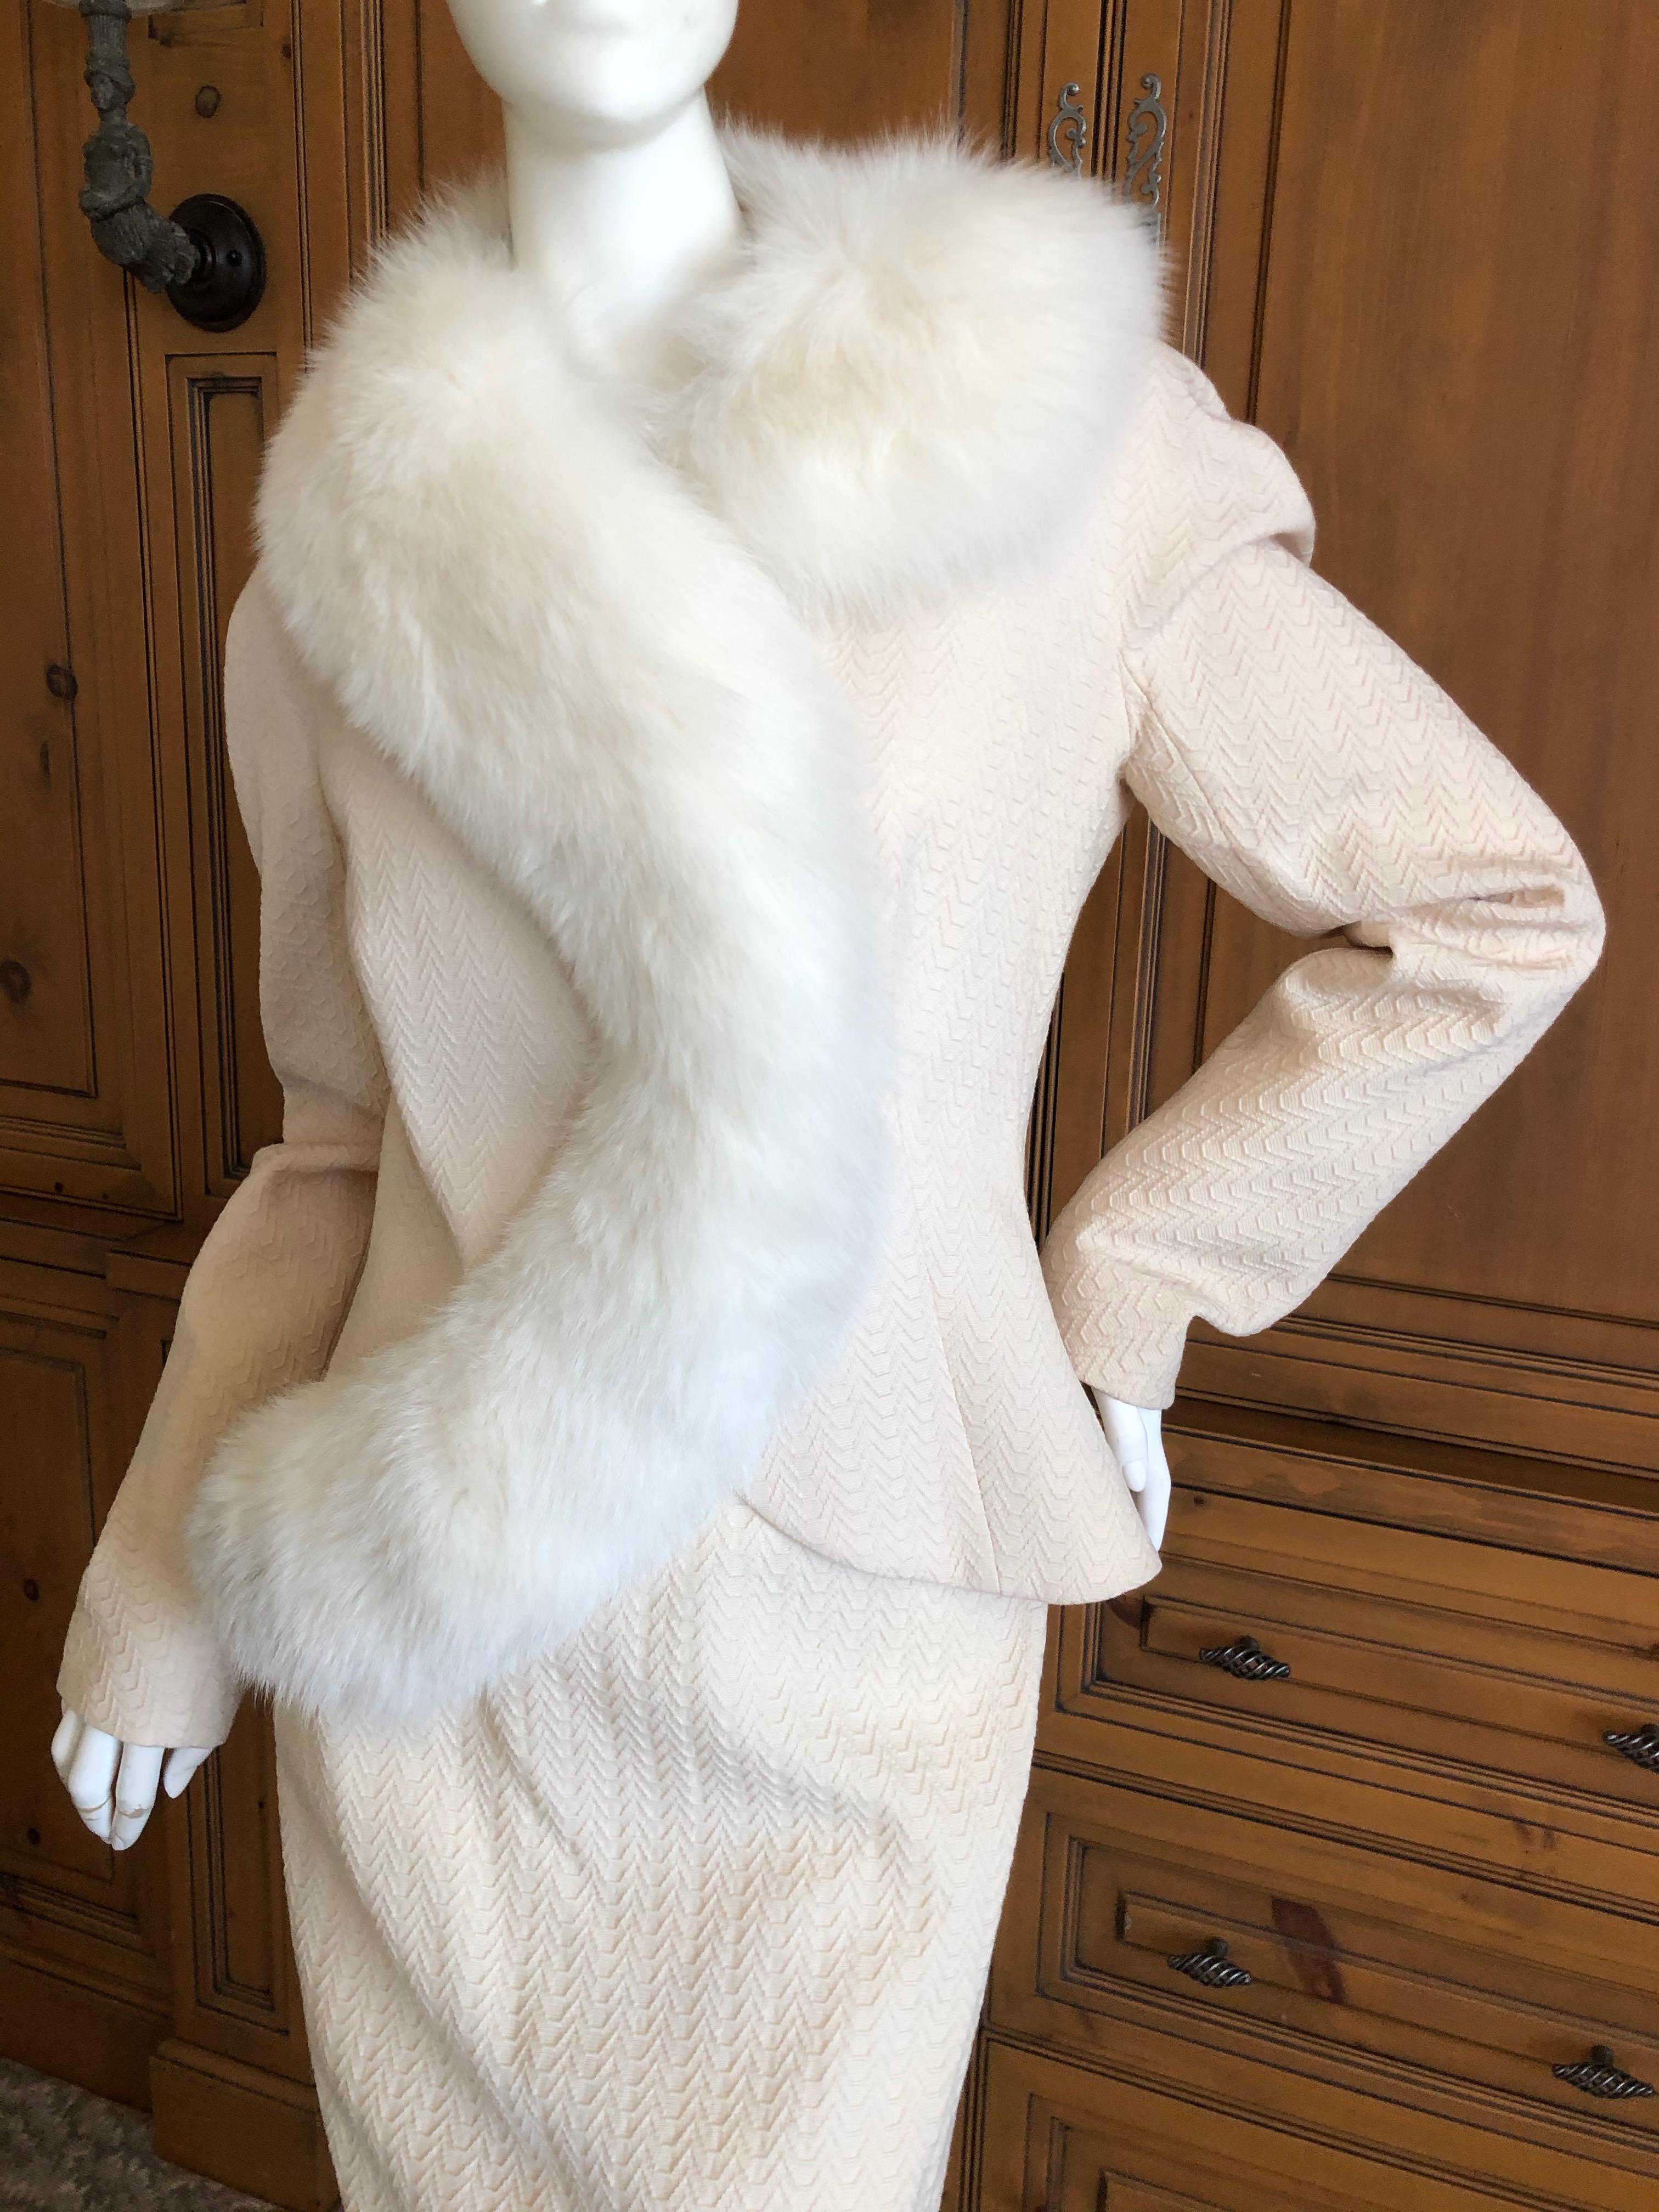 Women's  Christian Dior AW '97 by John Galliano Vintage Fox Fur Trim Jacket & Skirt Suit For Sale